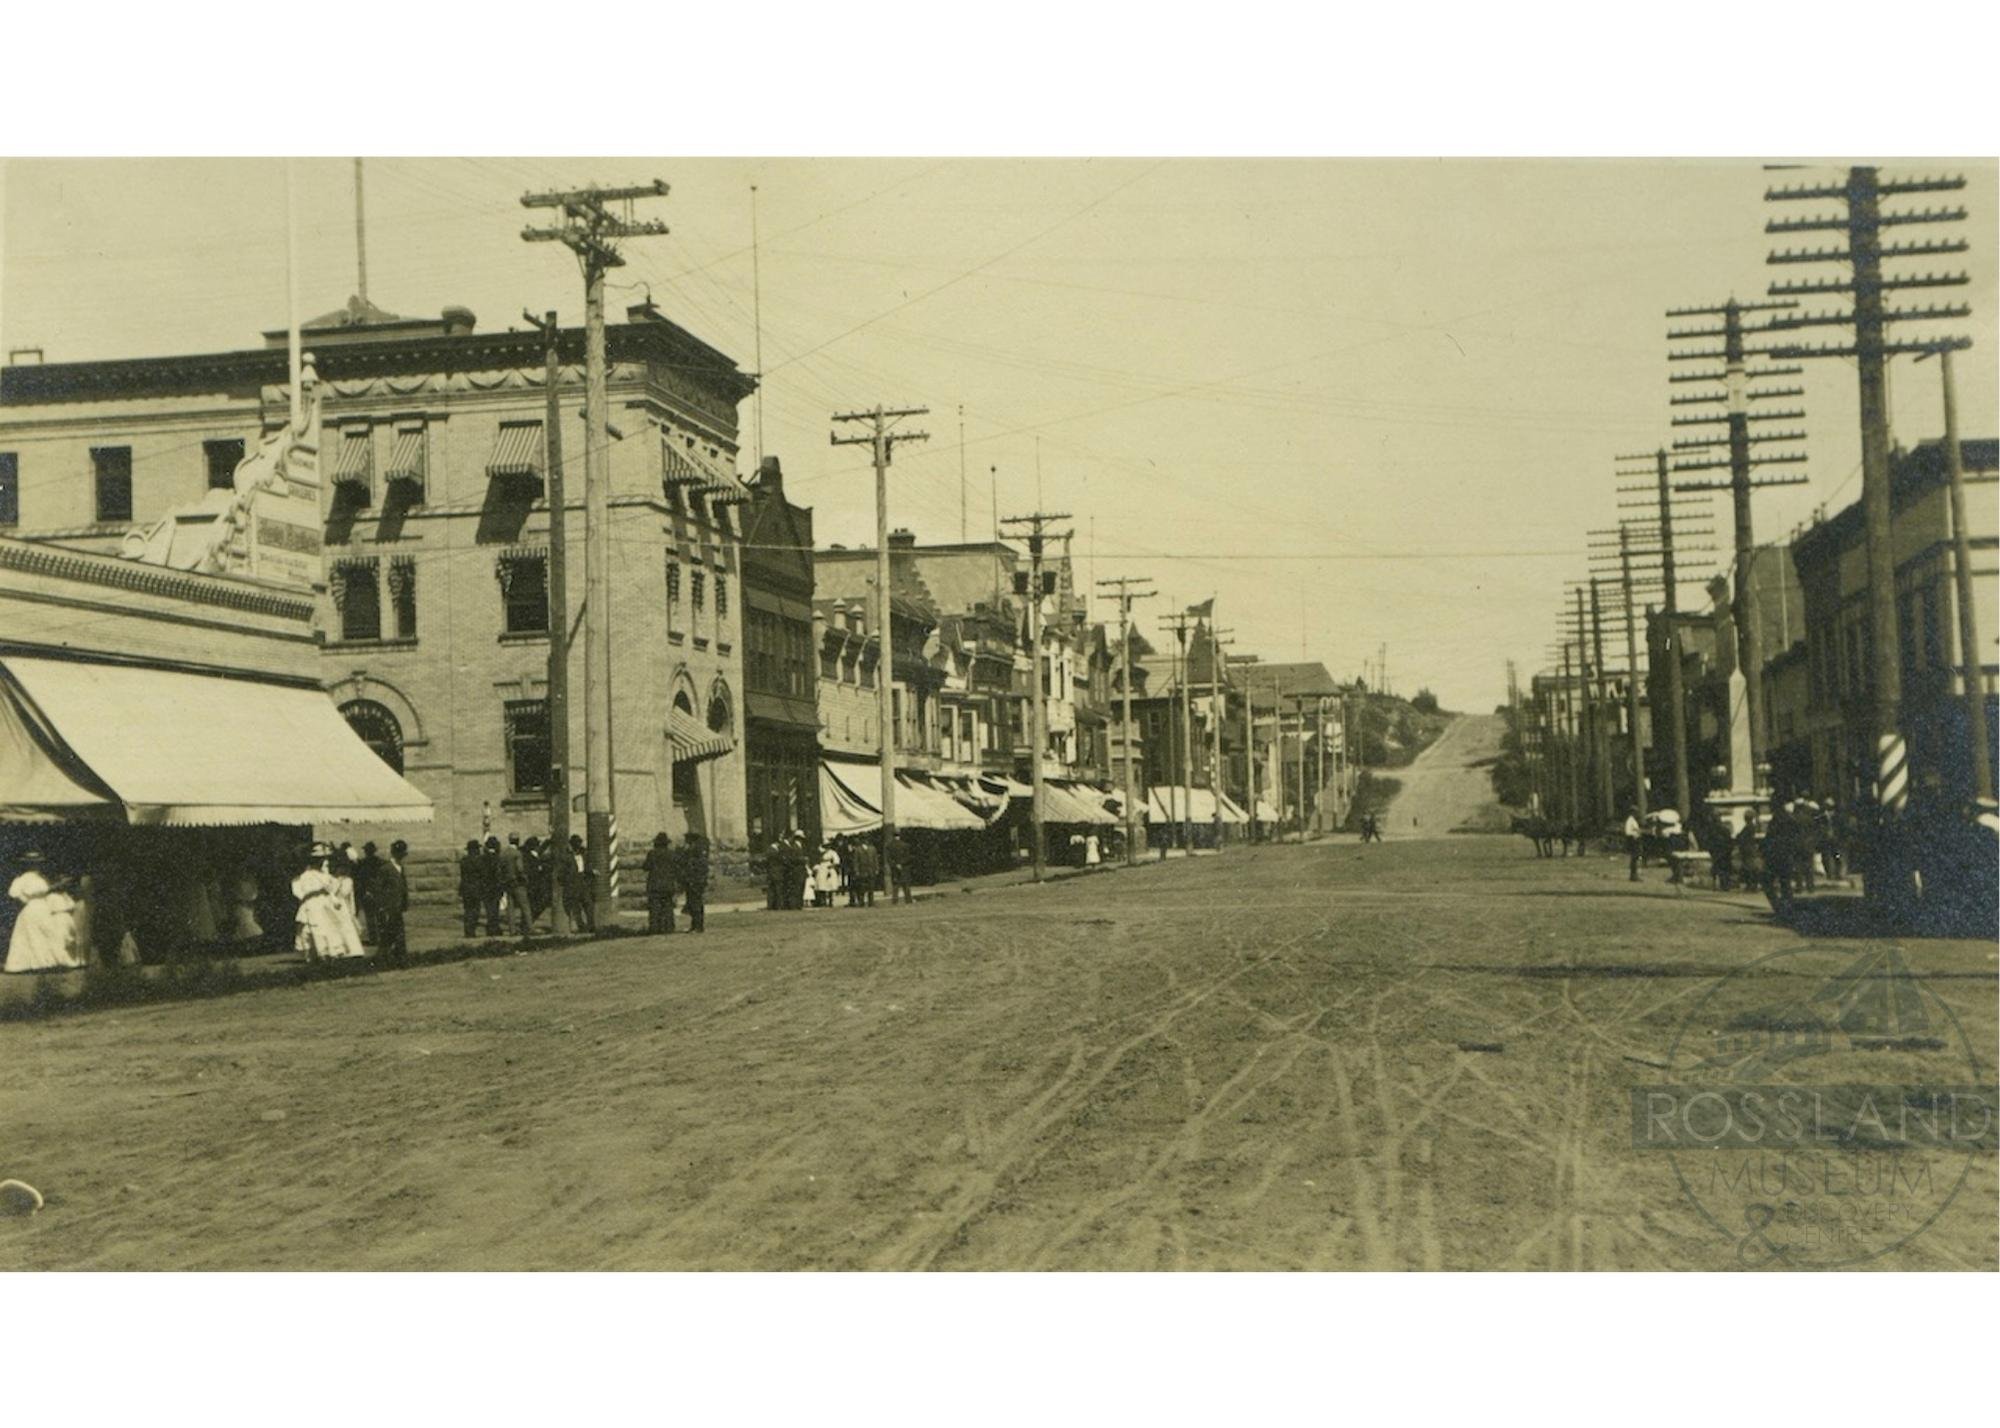   2333.0019 : Columbia Avenue, date unknown. The Bank of Montreal is on the left. 